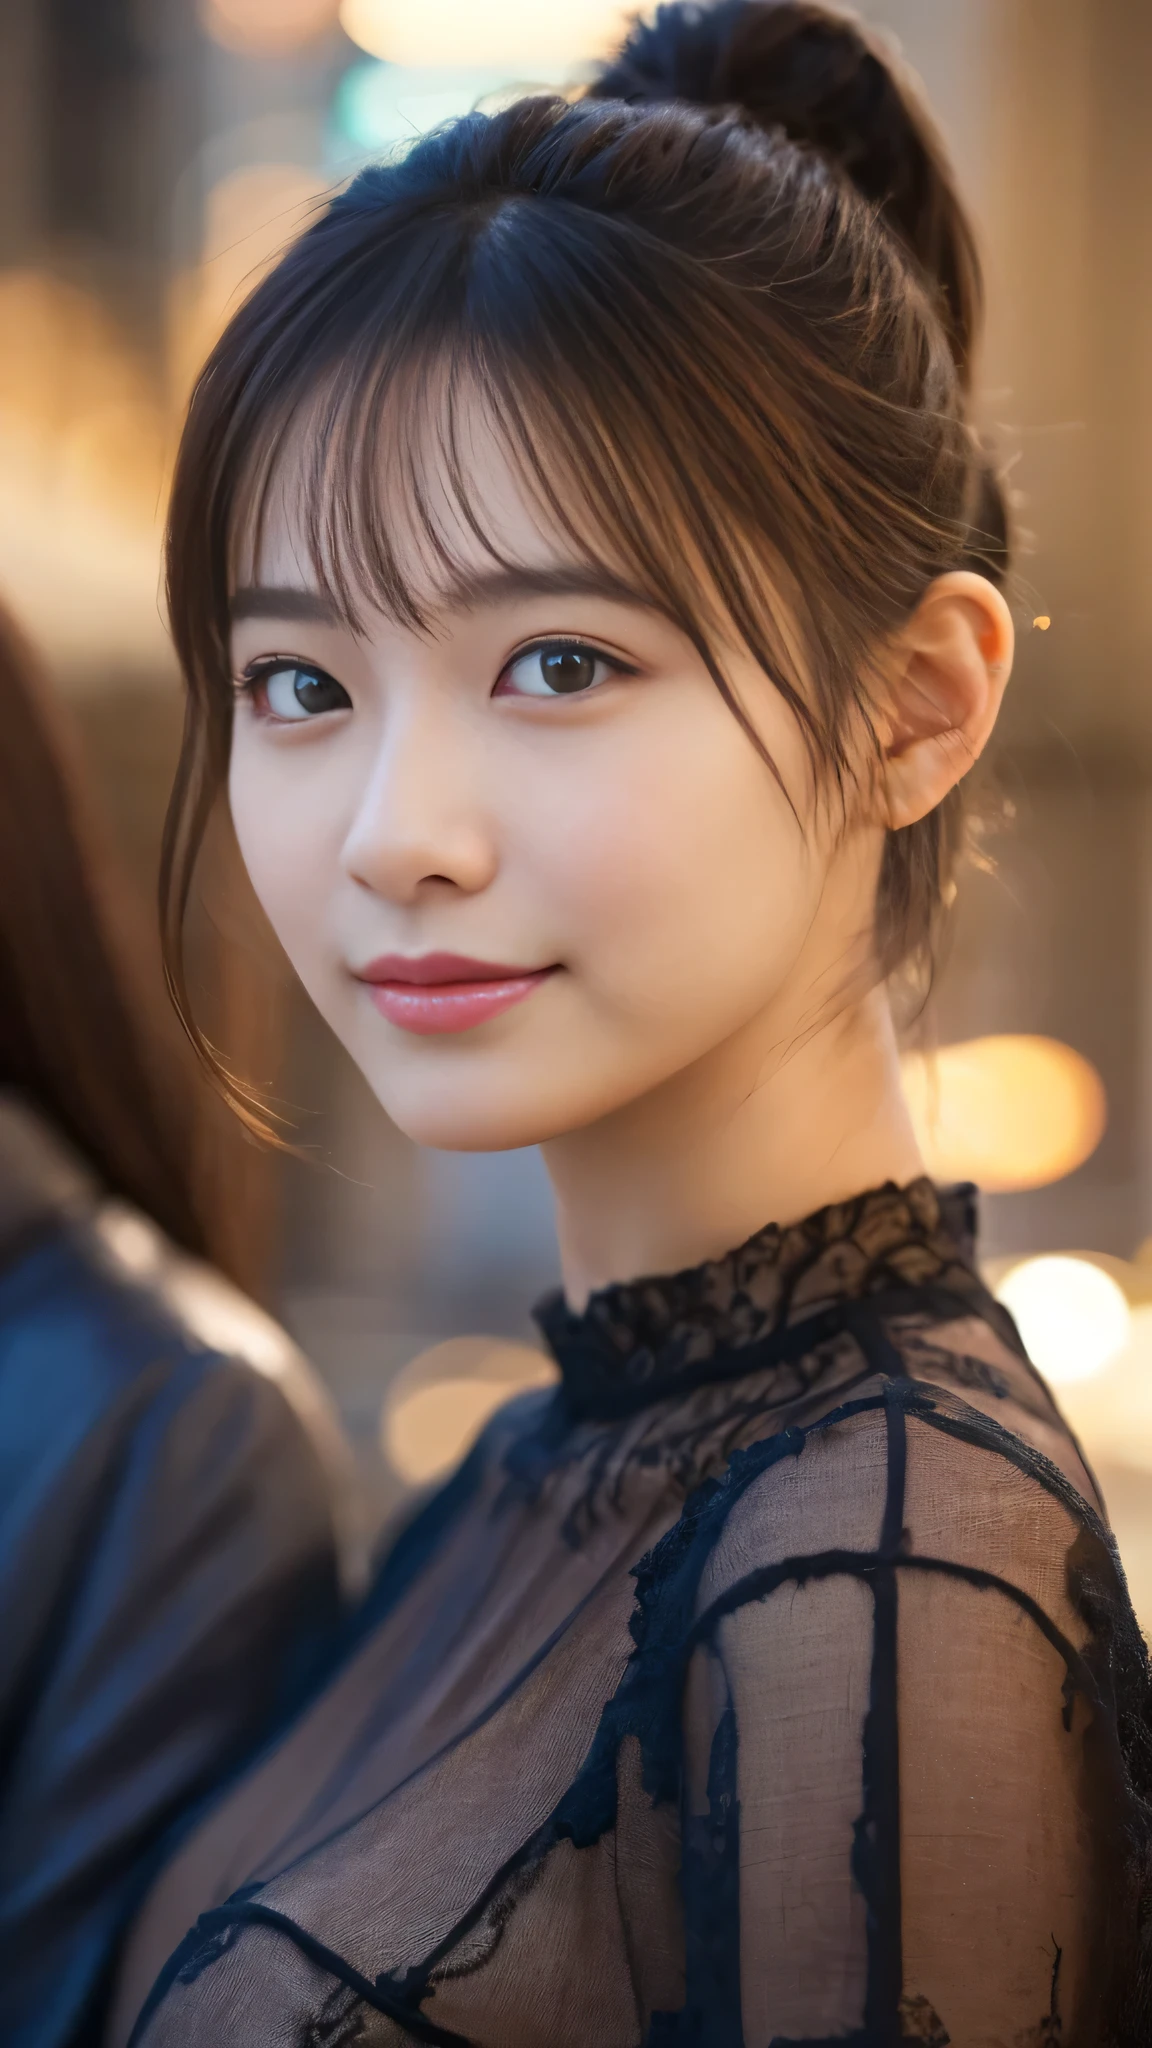 1 girl, (Wearing a black blouse:1.2), beautiful japanese actress, (ponytail:1.3),
(RAW photo, highest quality), (realistic, Photoreal:1.4), masterpiece, 
very delicate and beautiful, very detailed, 2k wallpaper, wonderful, 
finely, Very detailed CG Unity 8k 壁紙, Super detailed, High resolution, 
soft light, beautiful detailed girl, very detailed目と顔, beautifully detailed nose, beautiful and detailed eyes, cinematic lighting, 
BREAK
(Against the backdrop of a snowy night cityscape 1.3), city lights, 
perfect anatomy, slender body, smile, Face the front completely, look at the camera